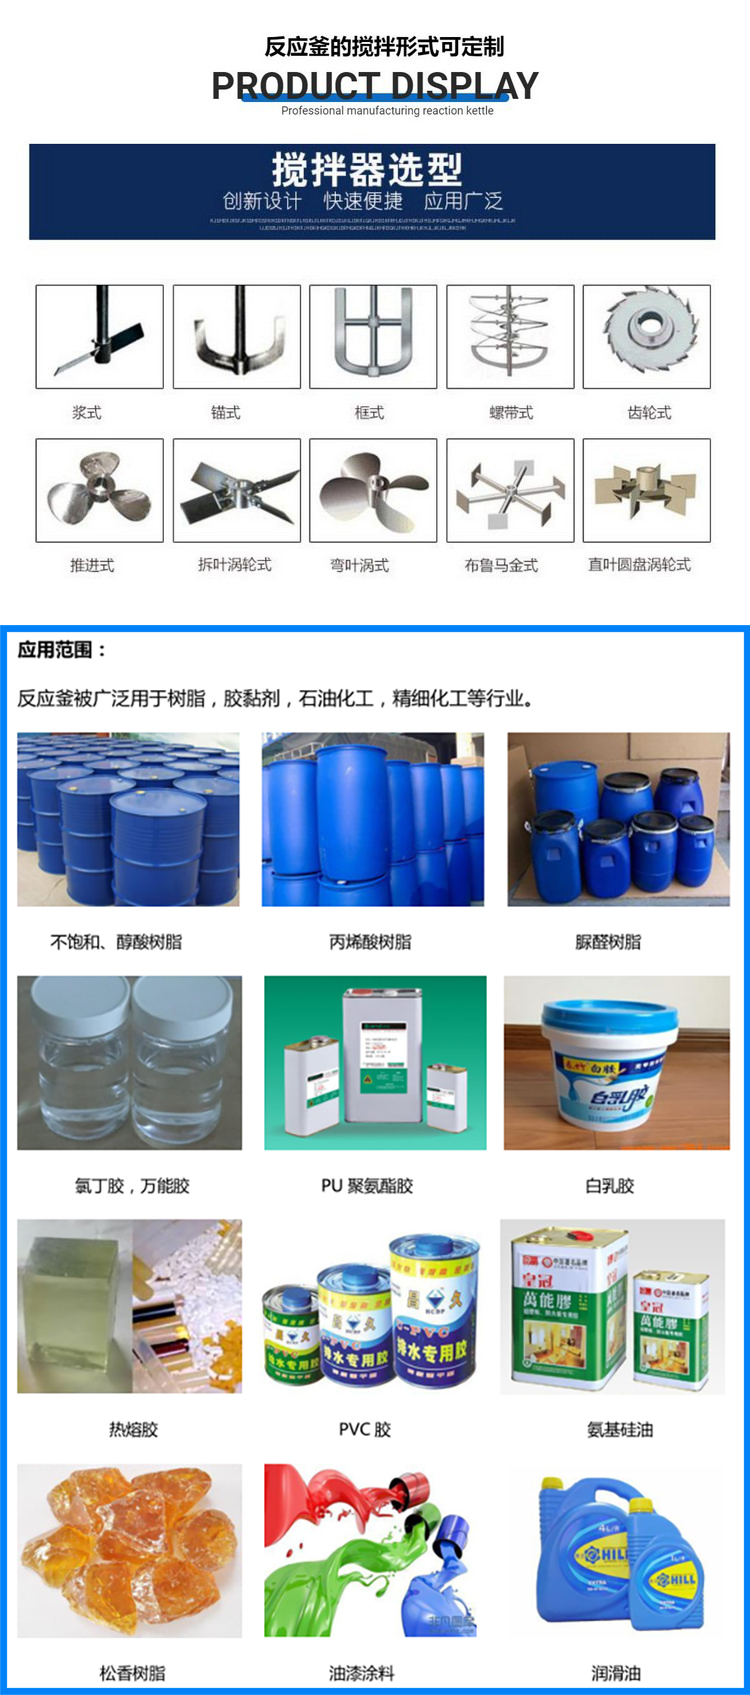 Coil stainless steel reaction kettle, spiral belt mixing kettle, far Red Jacket heating can be customized